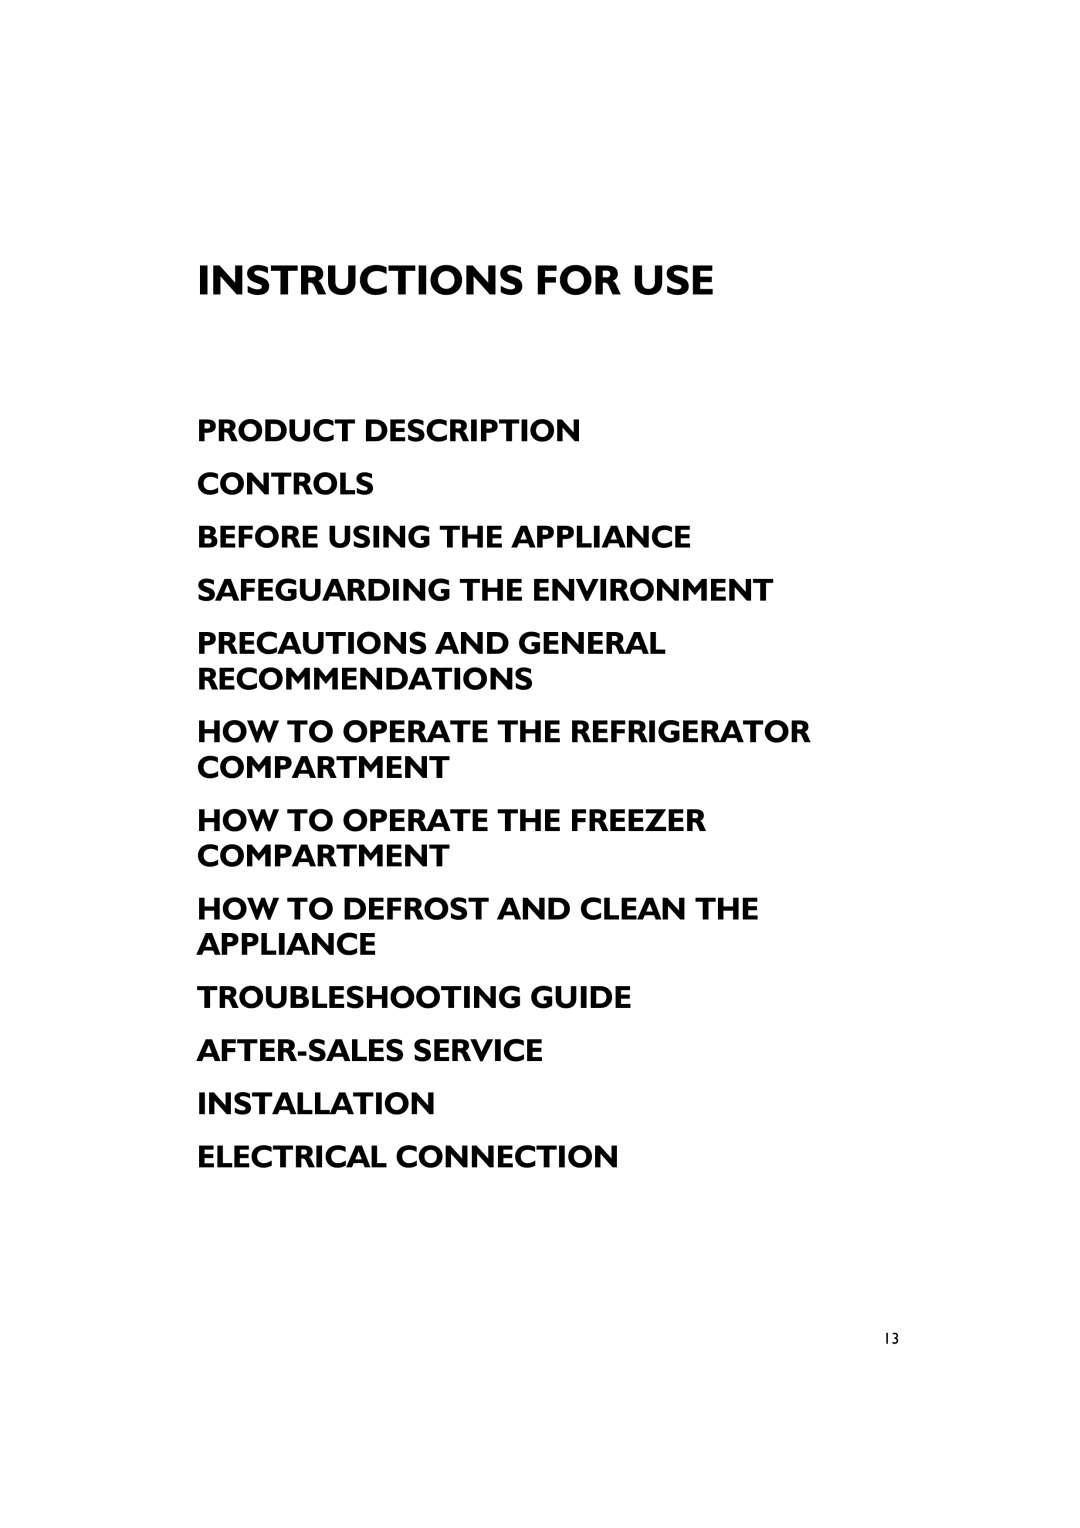 Smeg FR205A7 manual Product Description Controls Before Using The Appliance, How To Operate The Refrigerator Compartment 